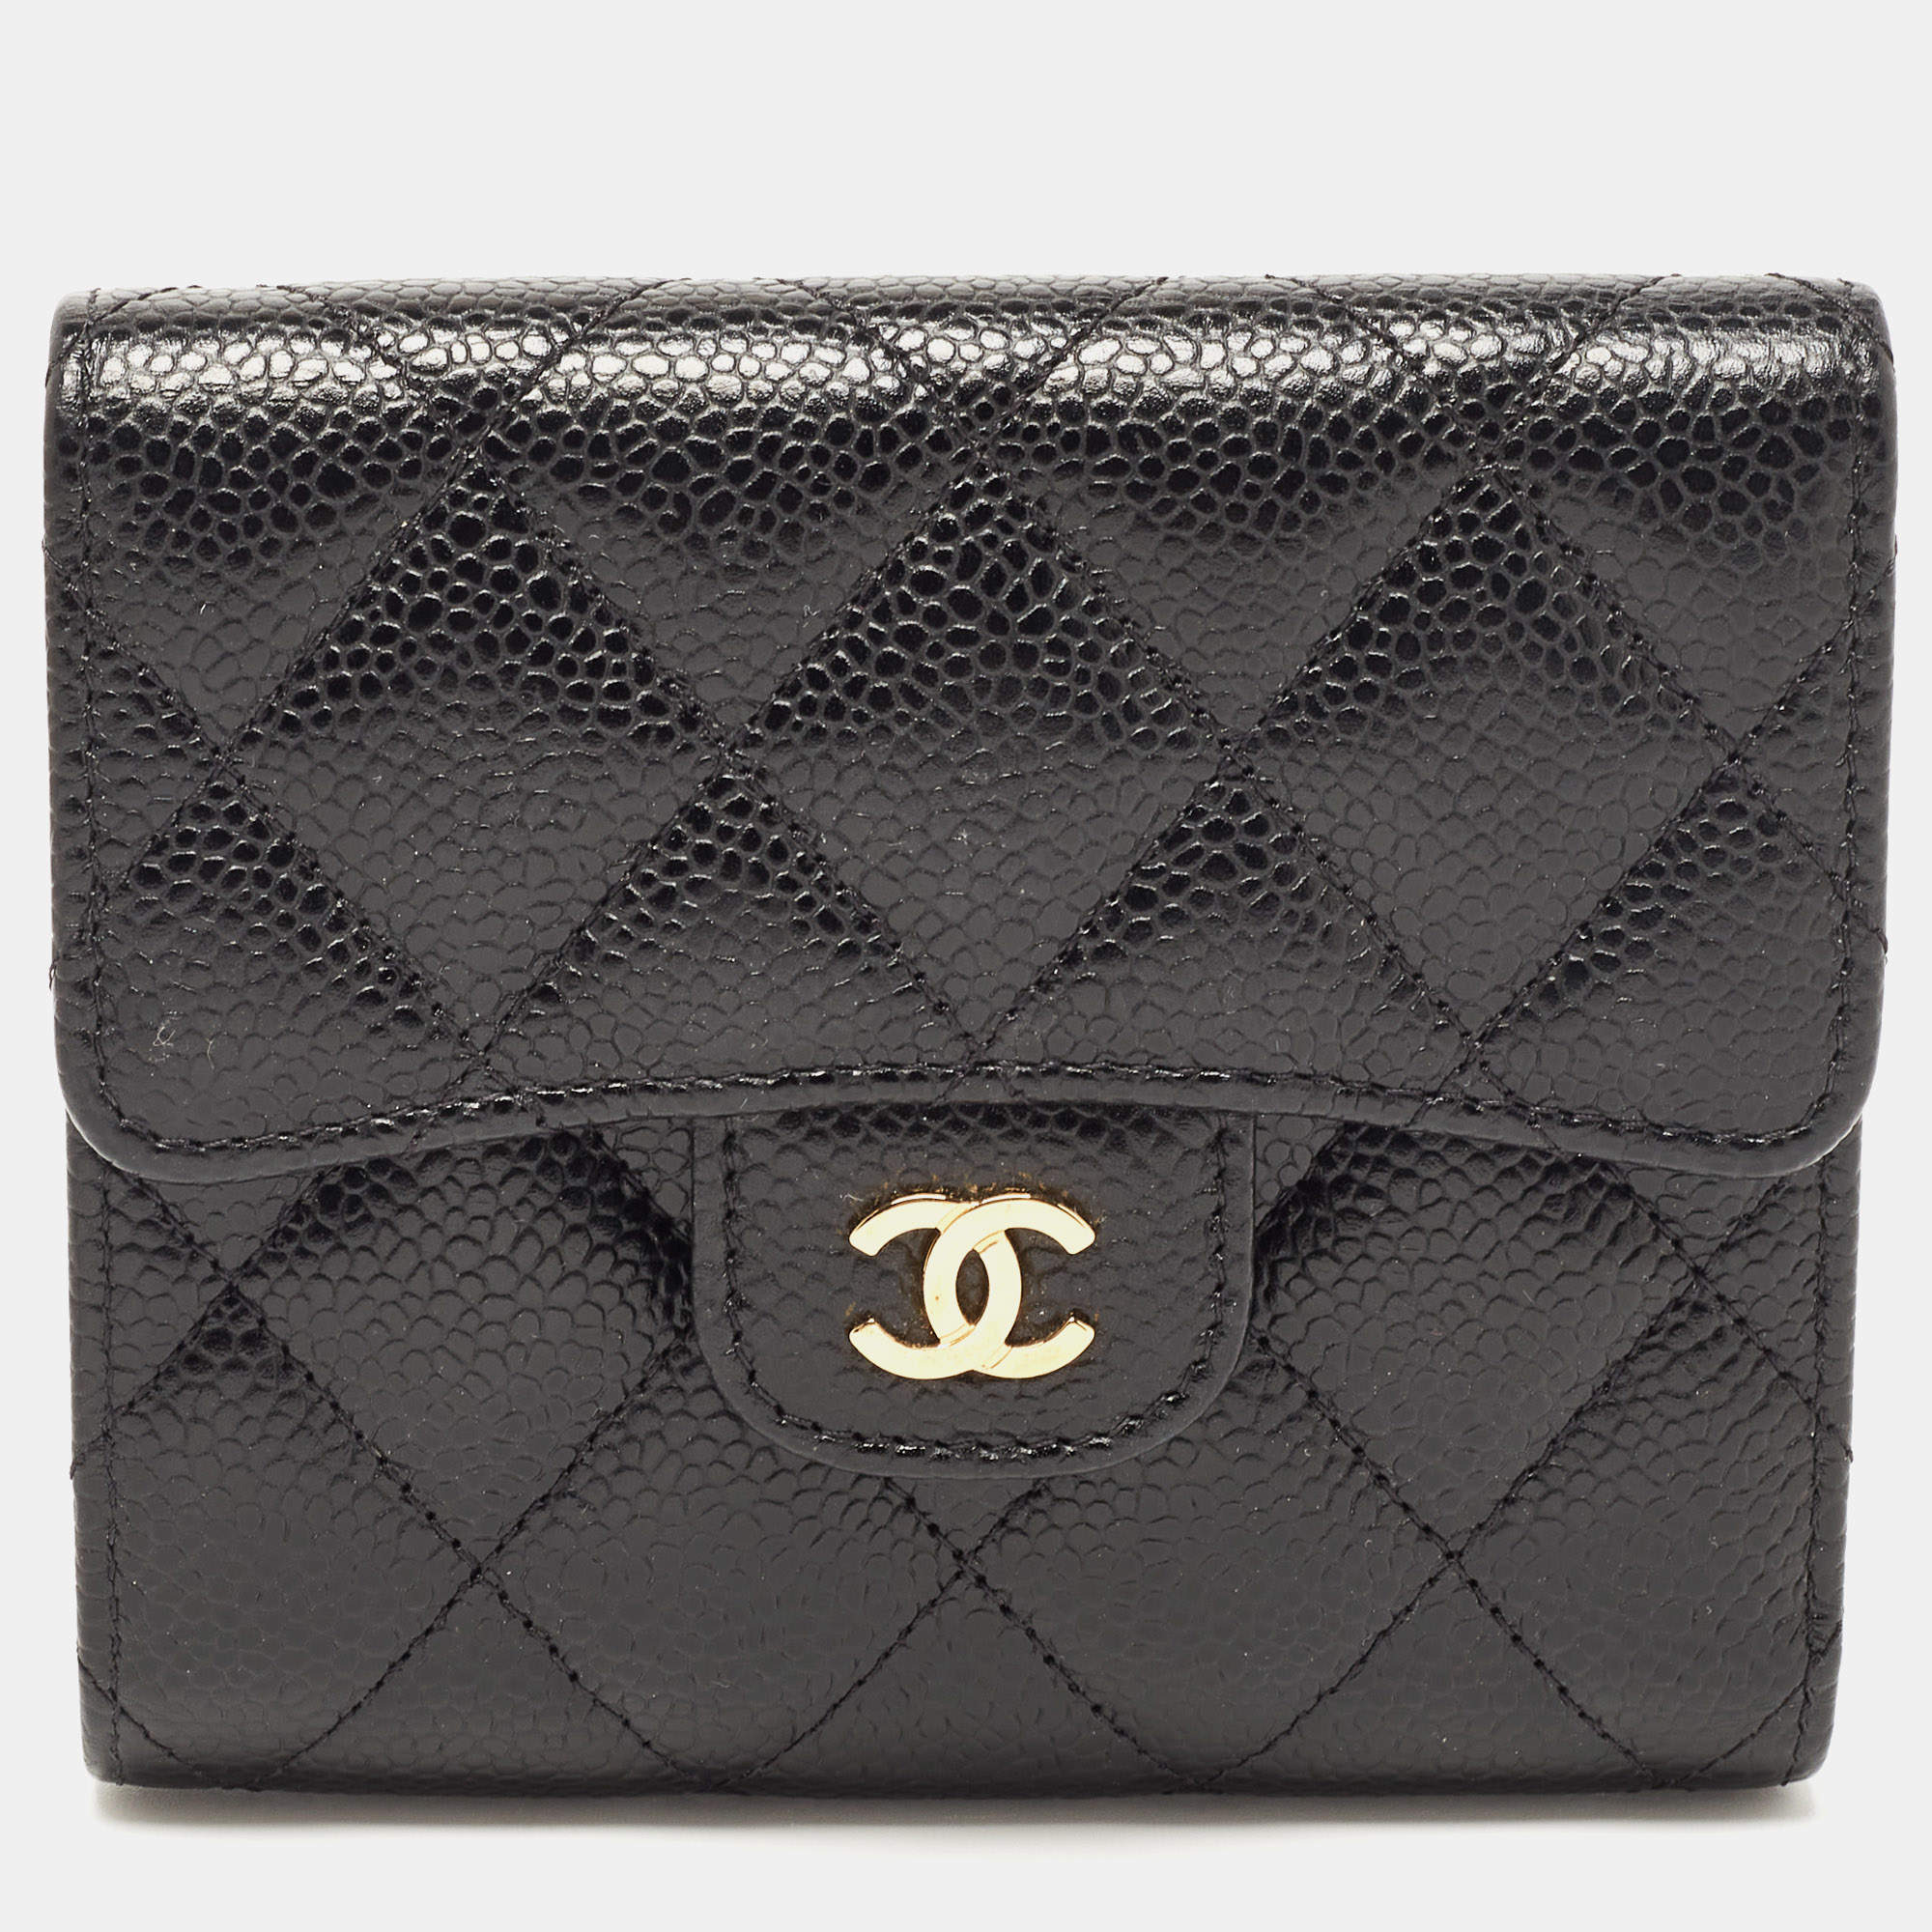 Chanel Classic Small Flap Wallet